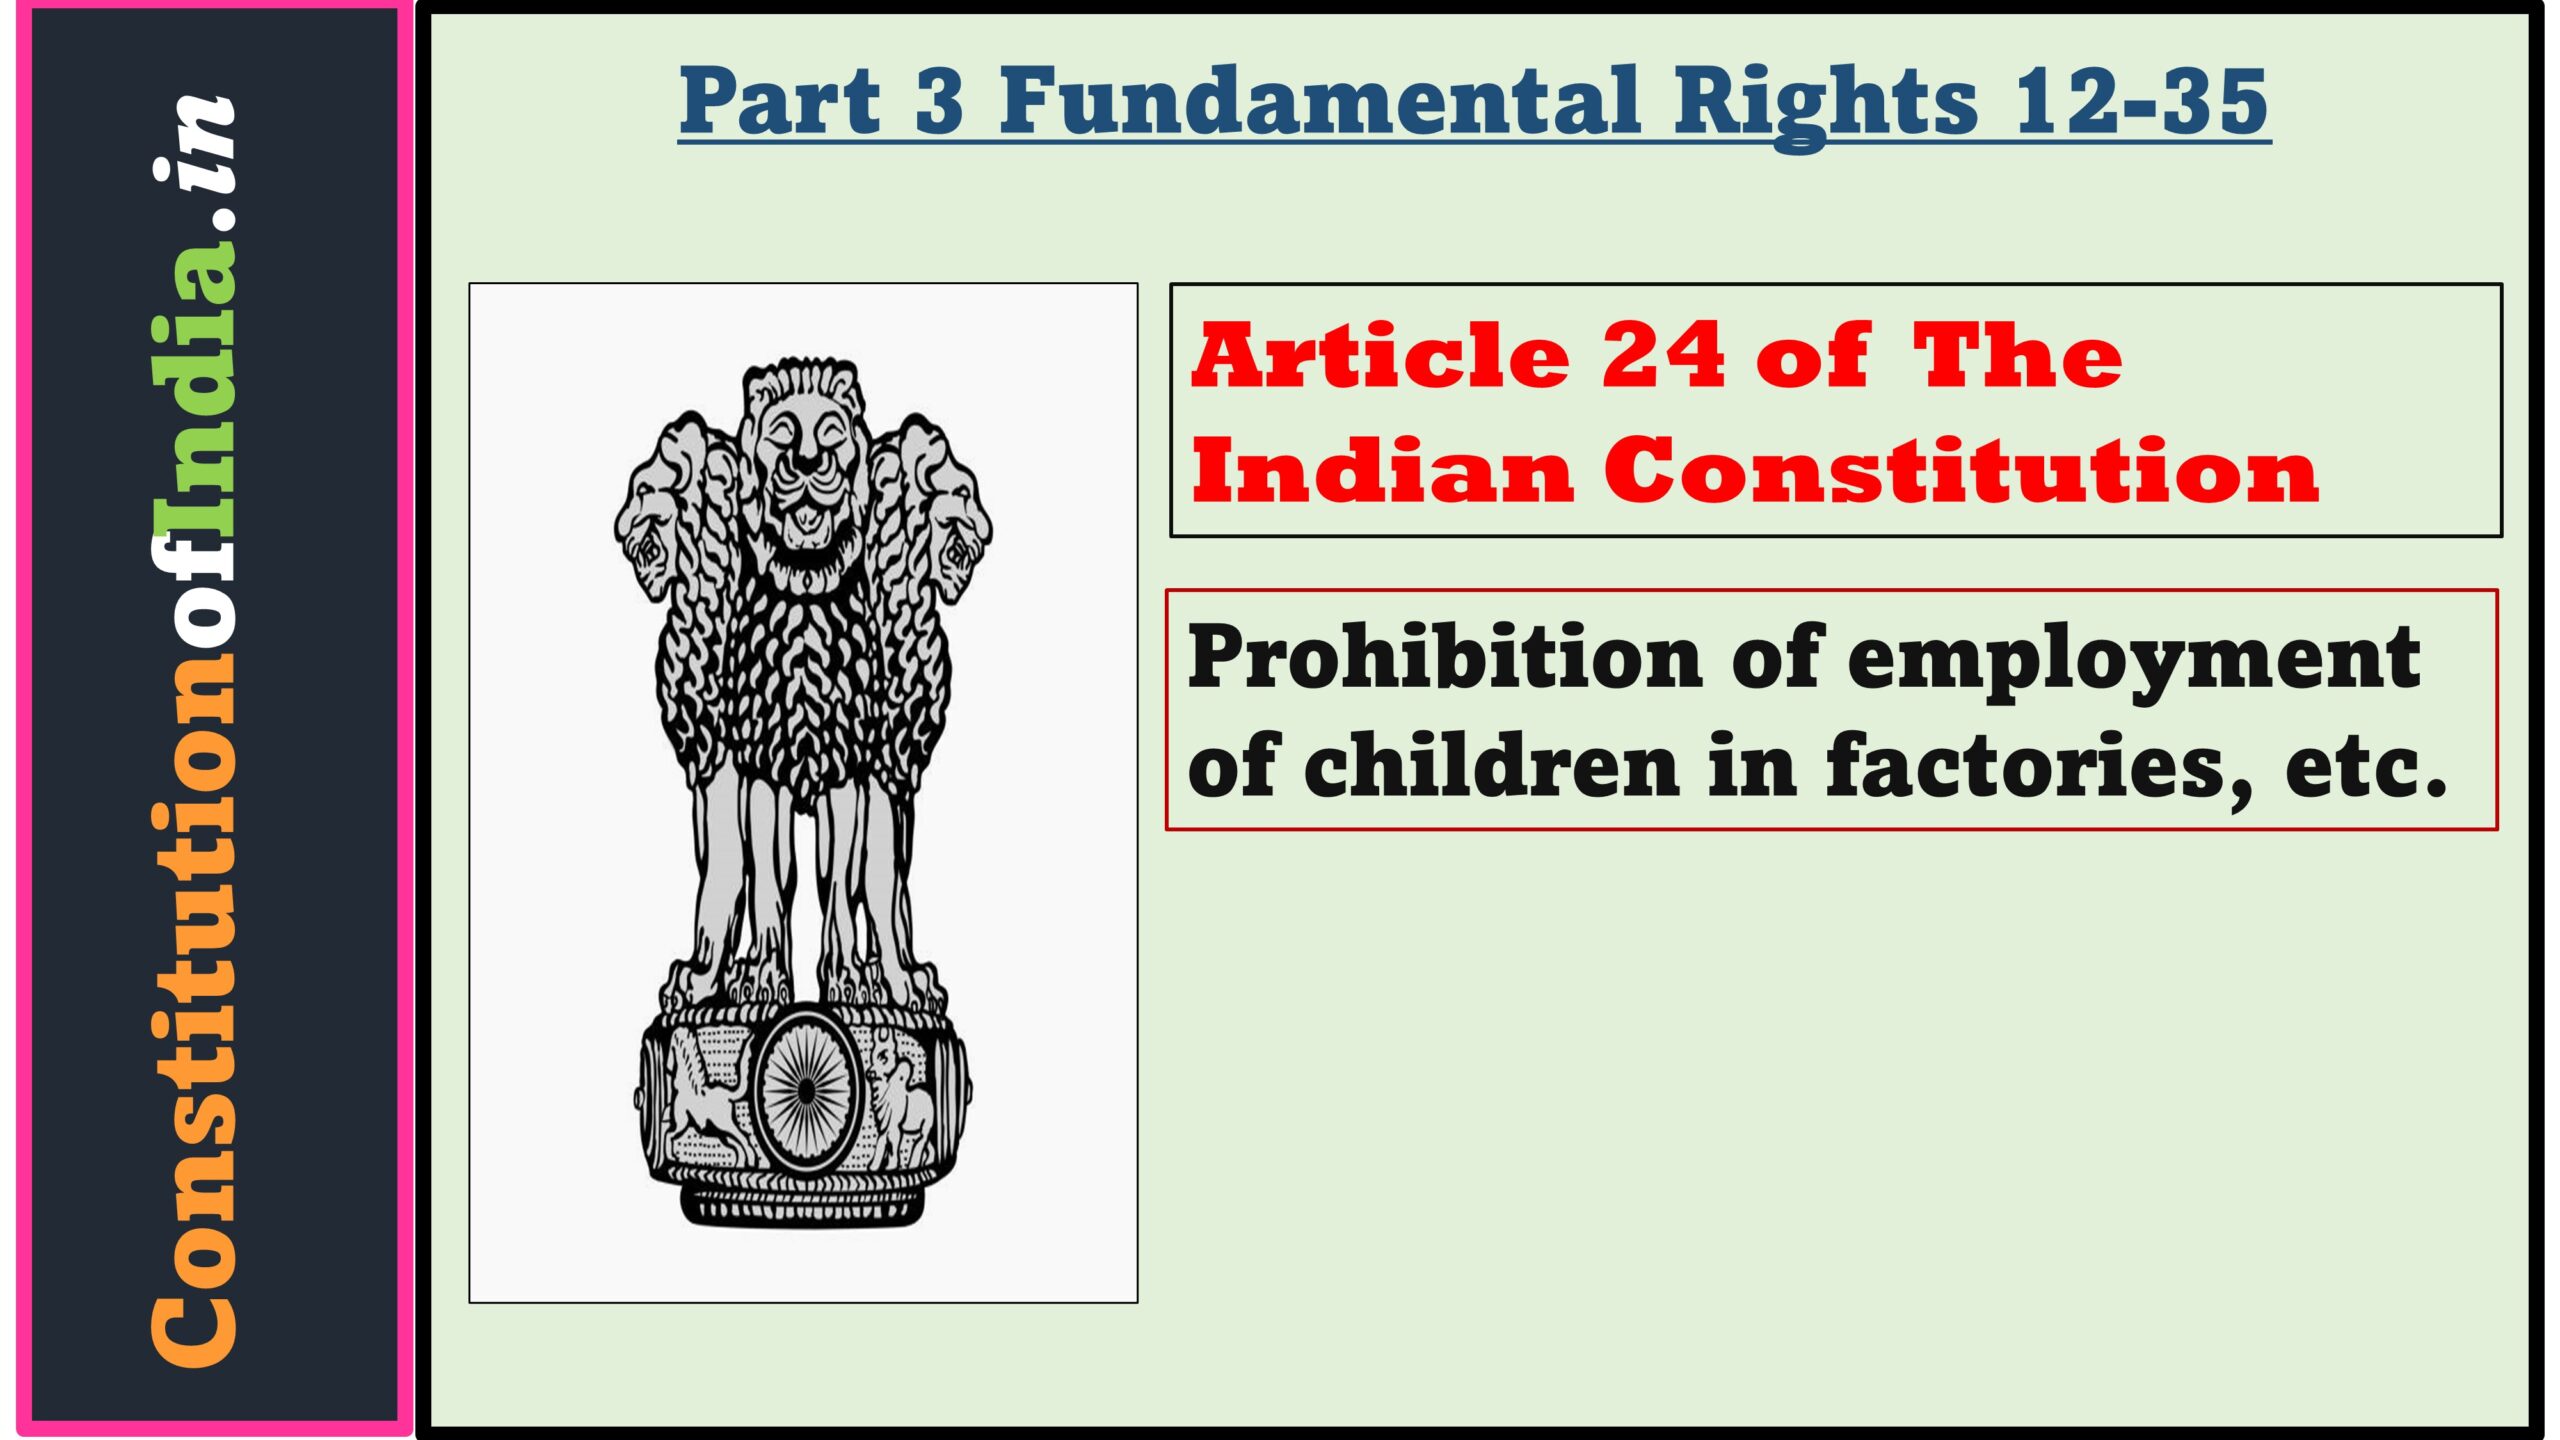 Article 24 of Indian Constitution